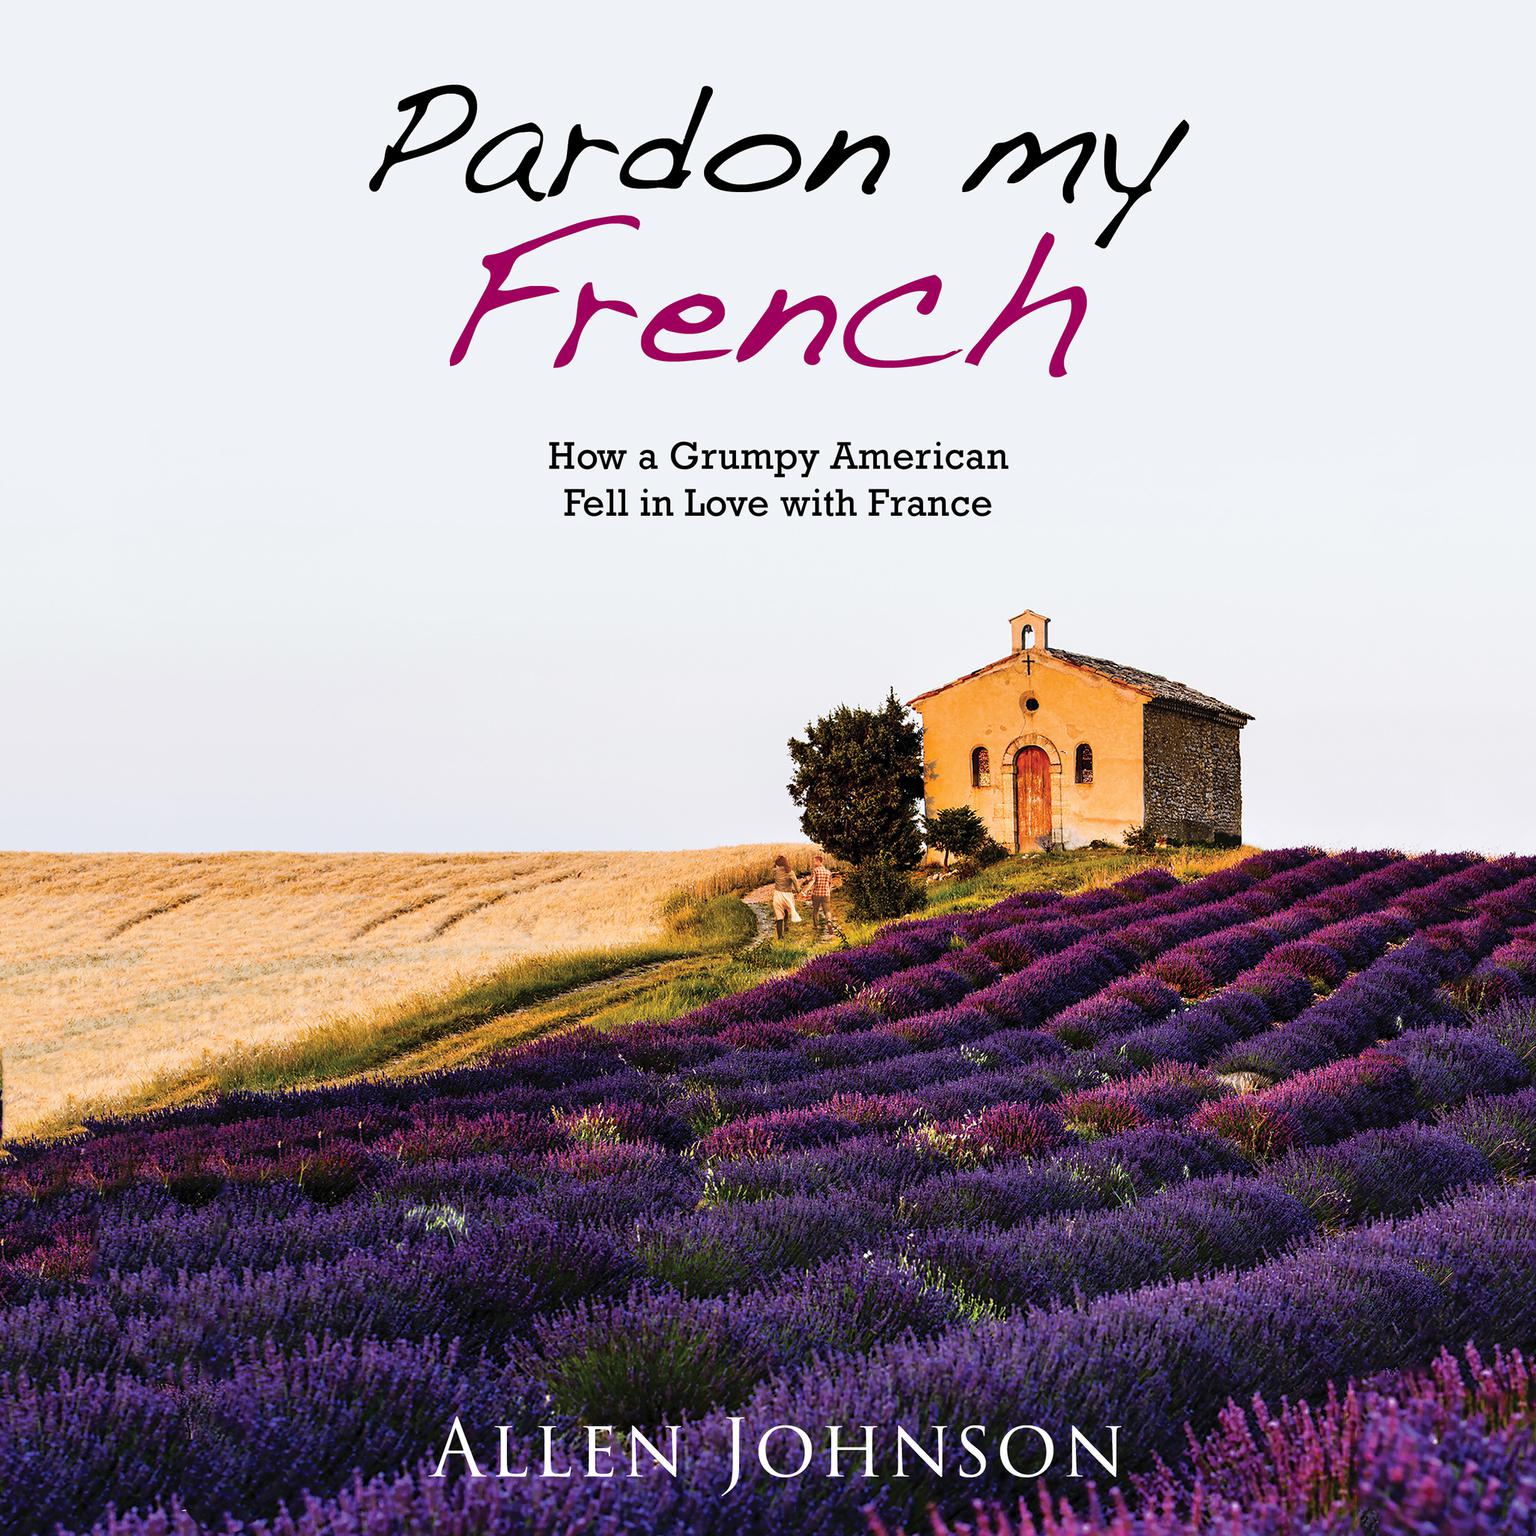 Pardon My French: How a Grumpy American Fell in Love with France Audiobook, by Allen Johnson